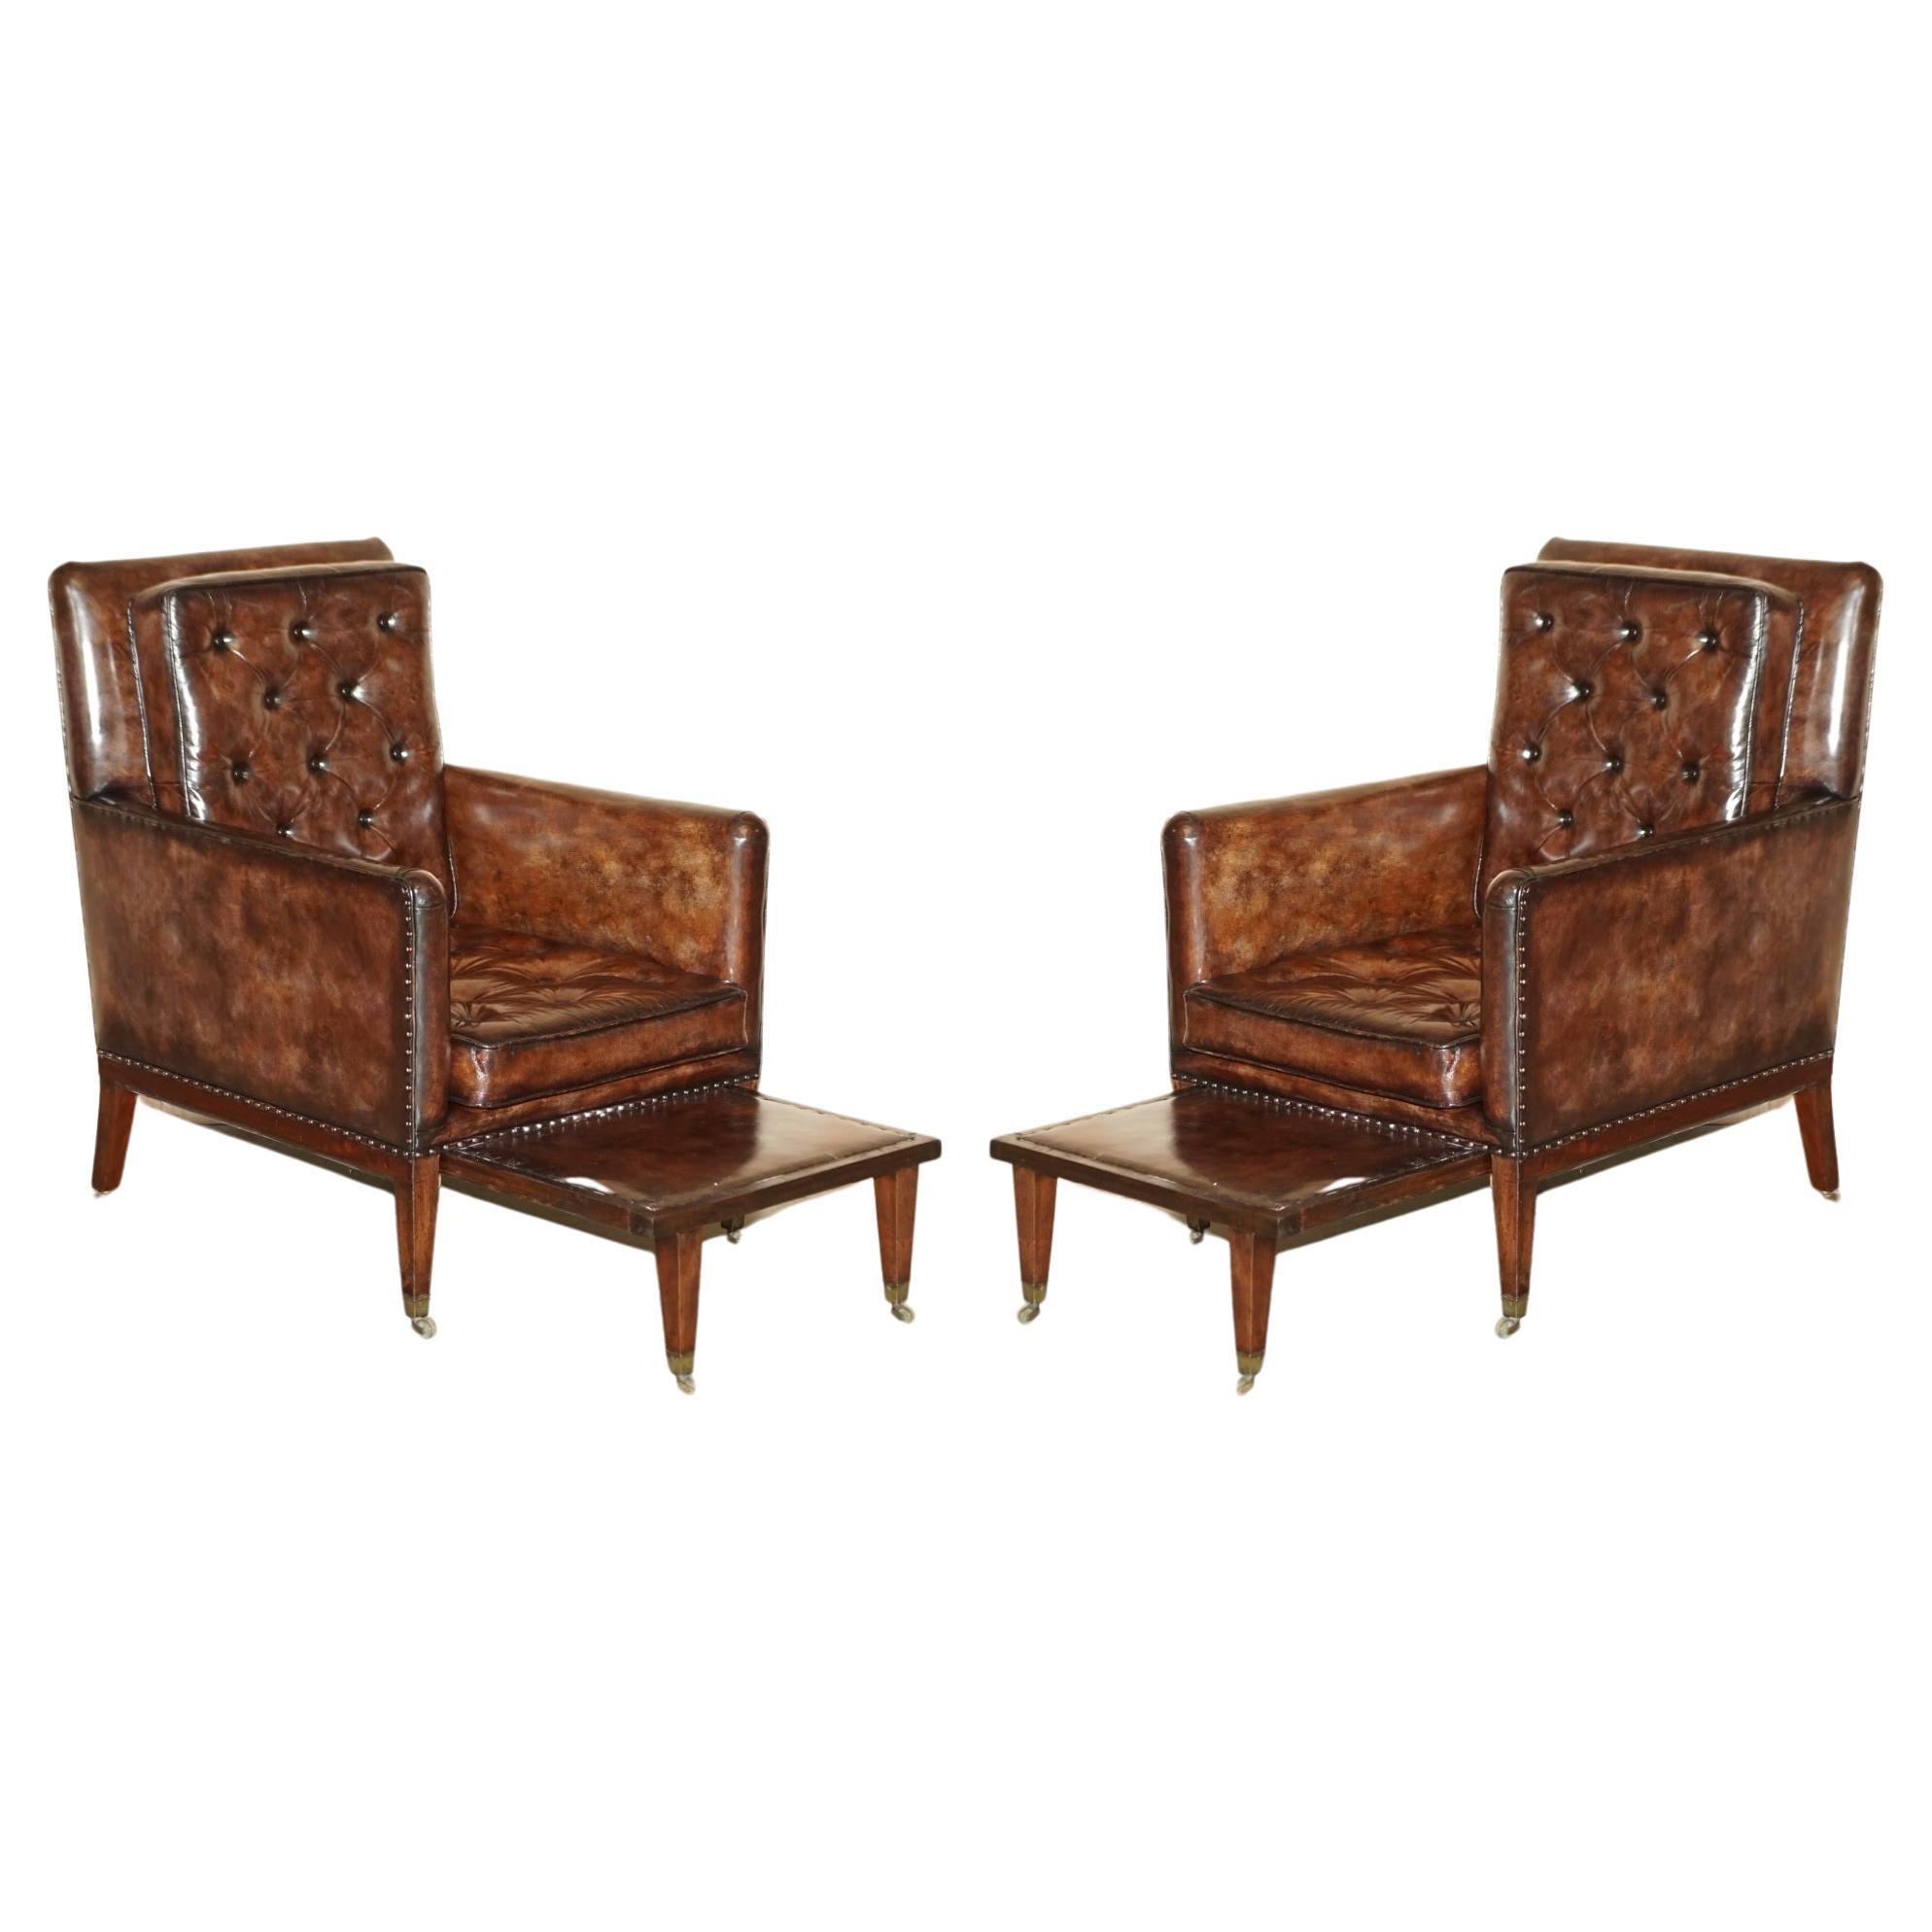 Pair of Antique Regency Brown Leather Chesterfield Armchairs Extending Stools